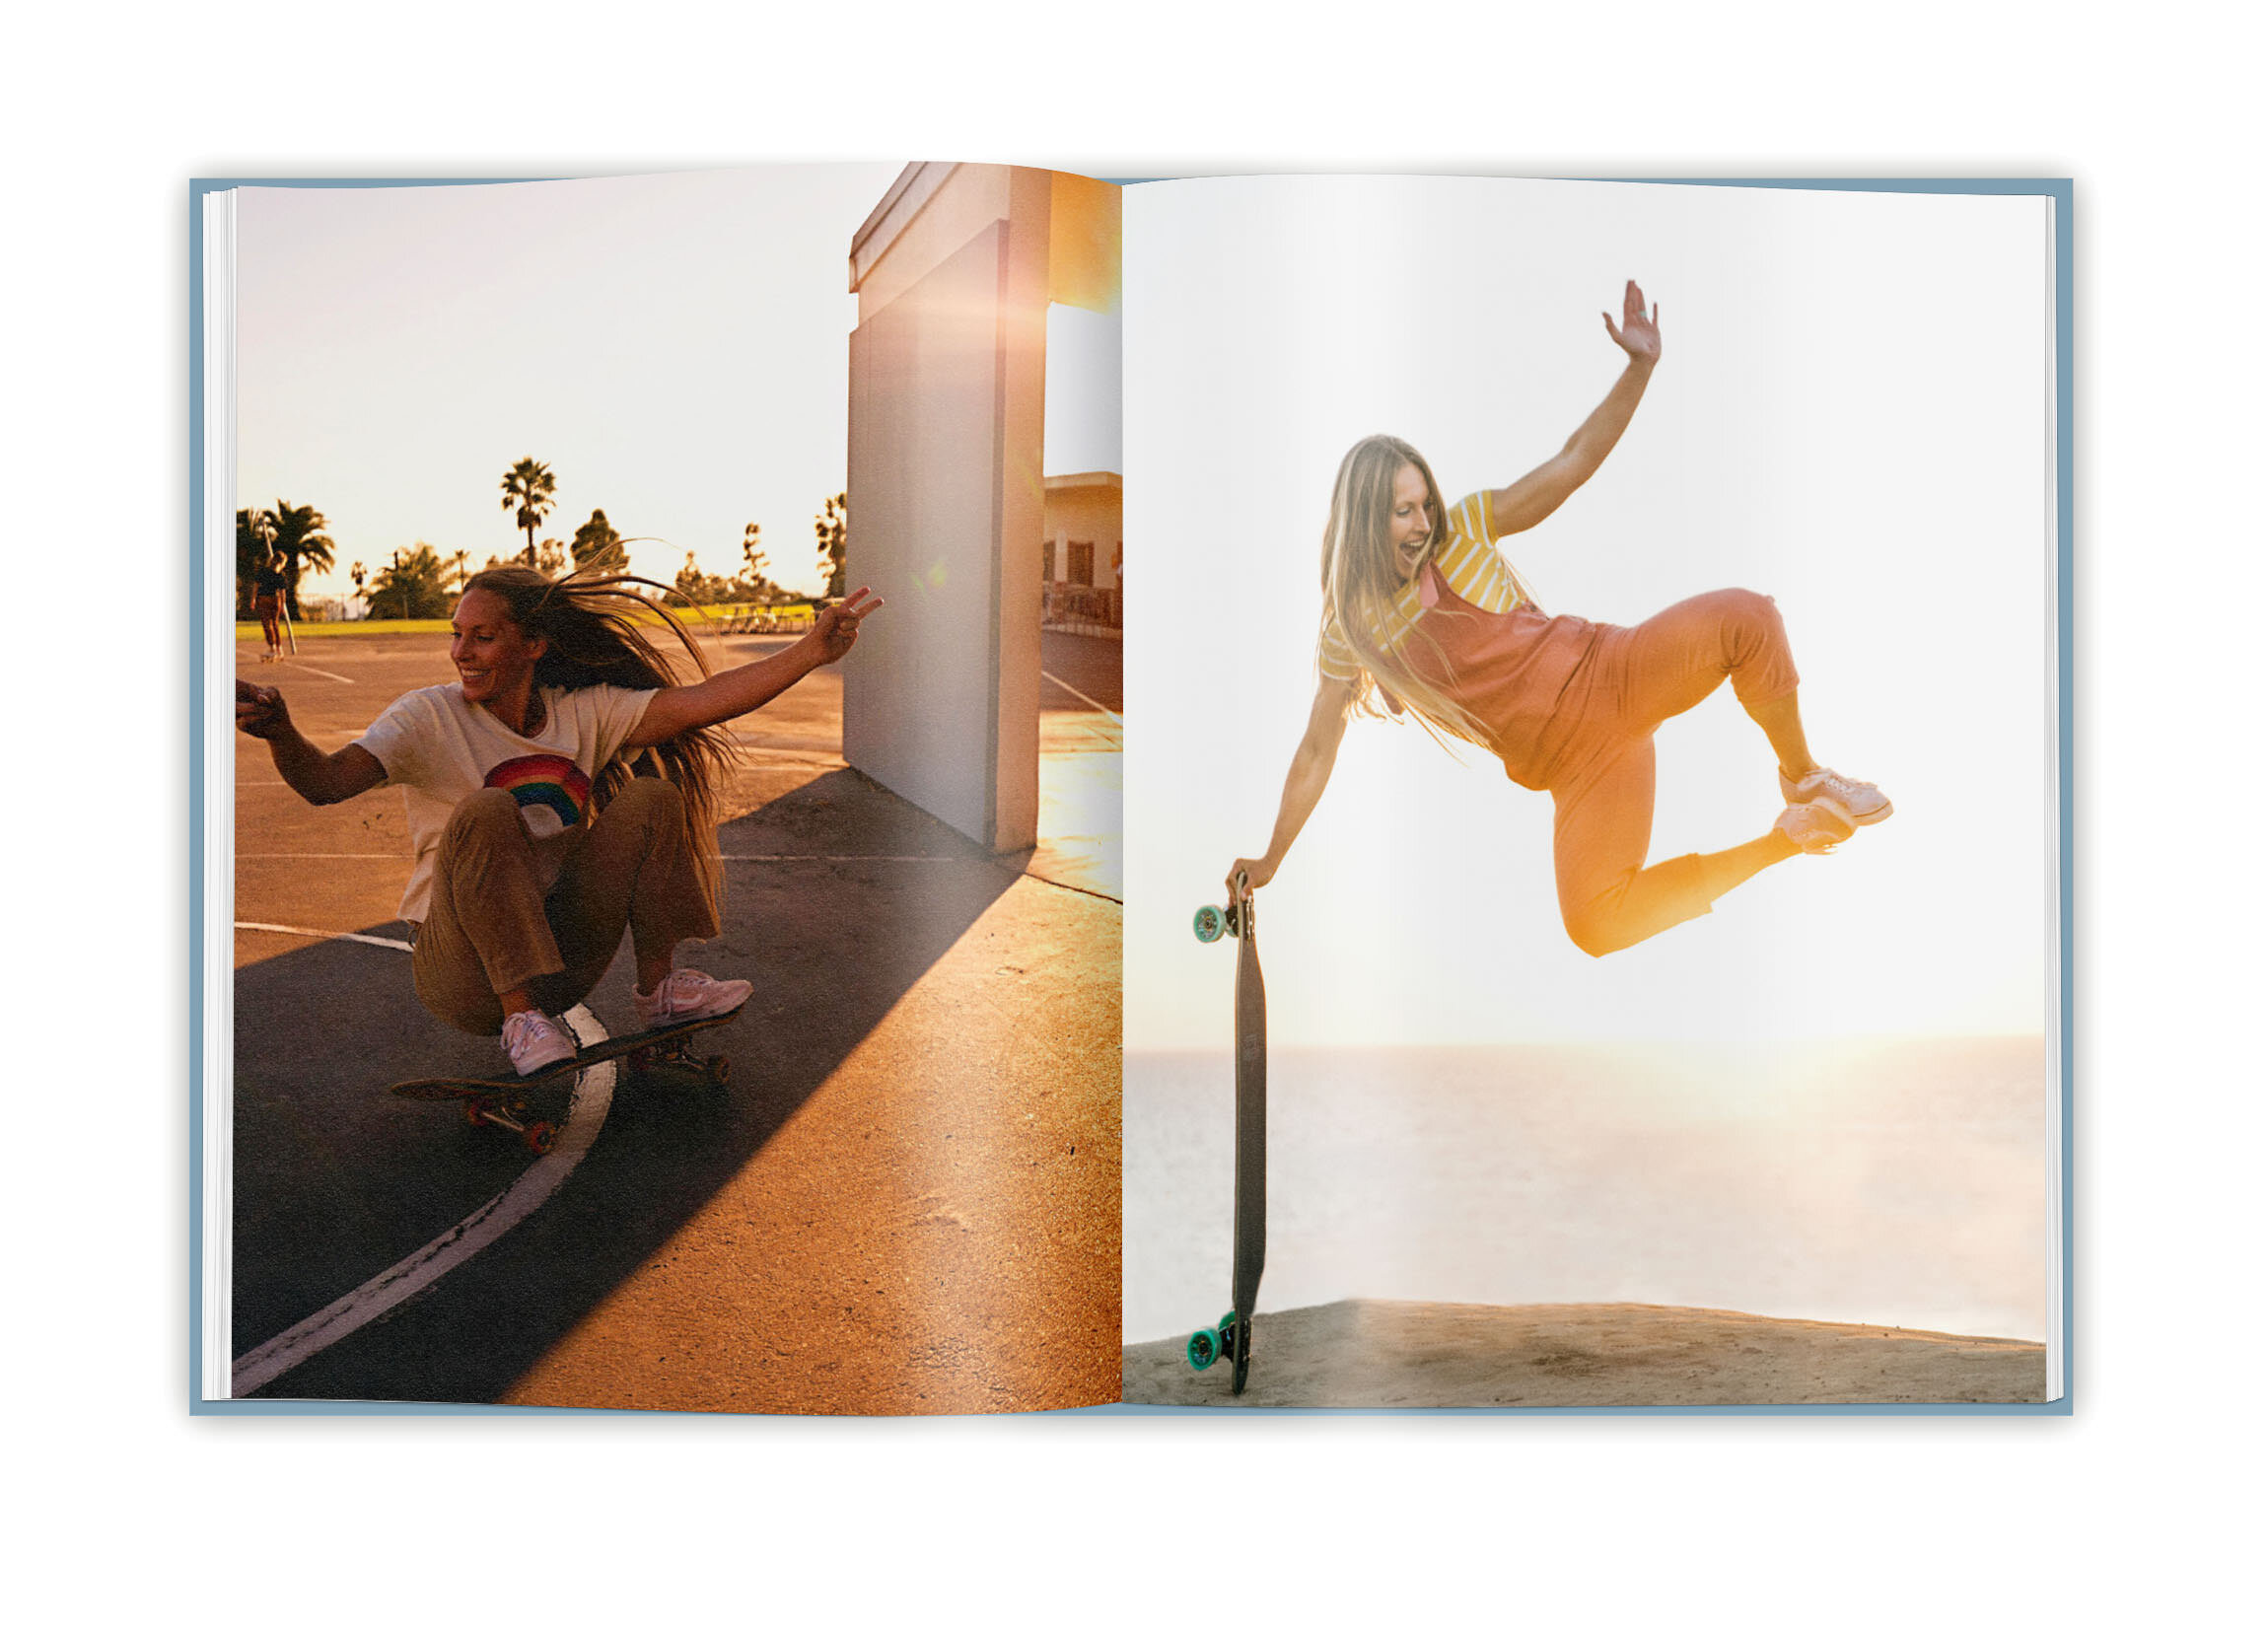  Kaelie Fisher for Kateboards (left).  Photo on right is not by Jo. 